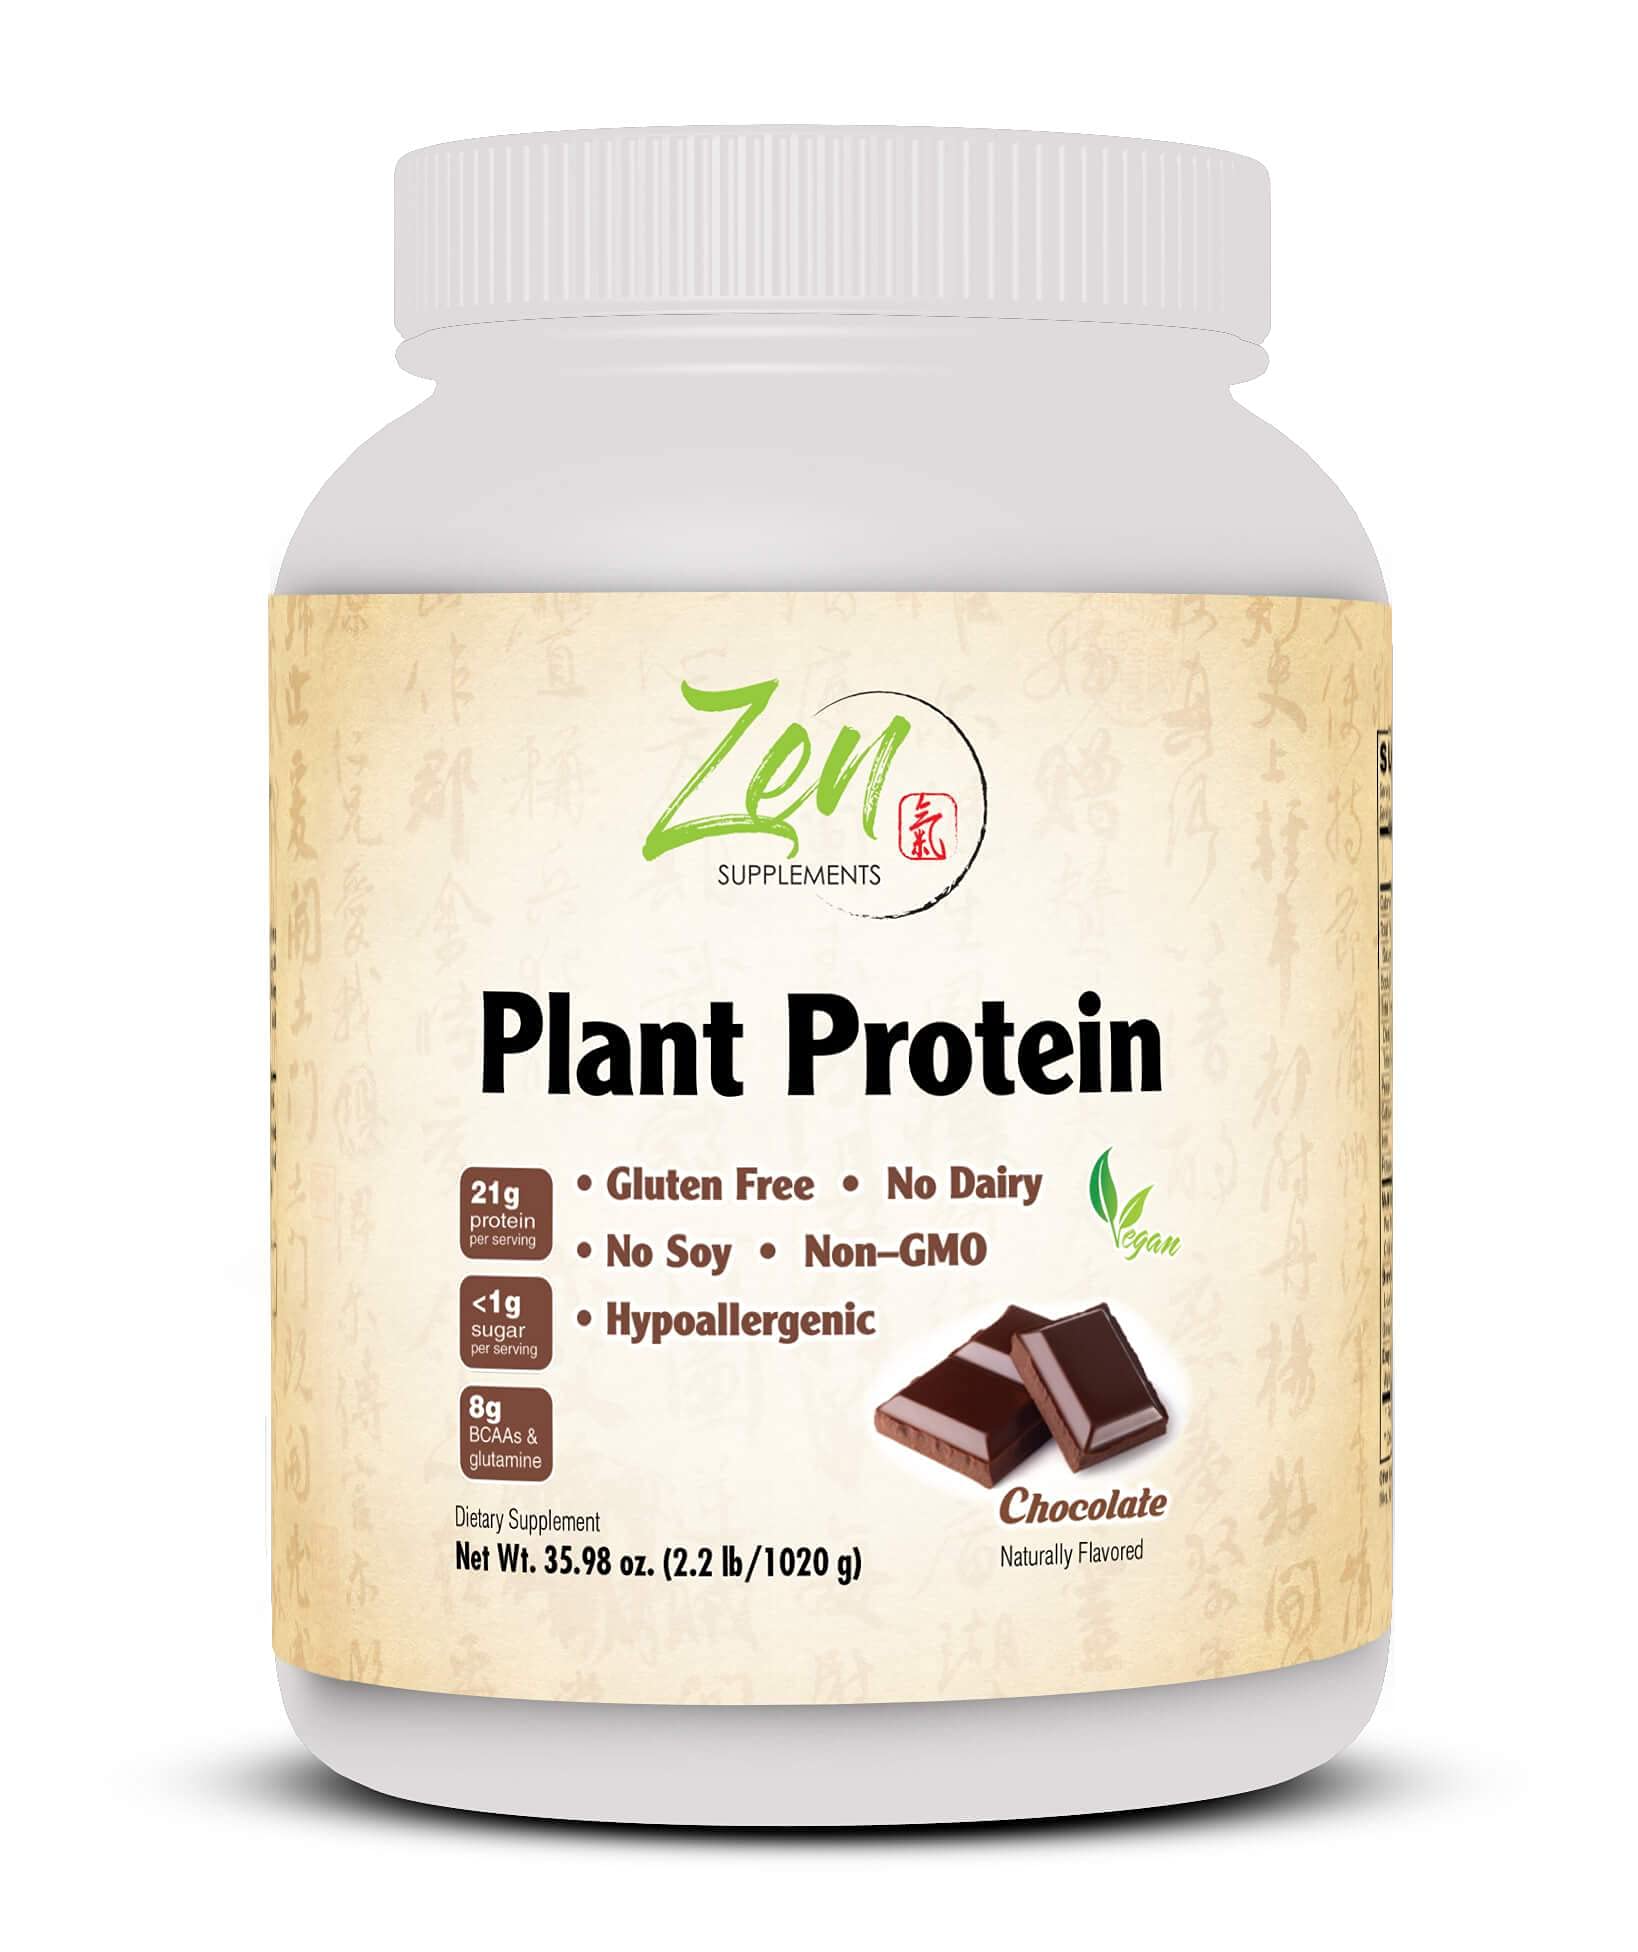 Zen Supplements - Plant Protein-Chocolate 1020G 2.2LB-Powder - 23 Grams of Protein Per Serving -Vegan, Low Net Carbs, Non Dairy, Gluten Free, Lactose Free, No Sugar Added, Soy Free, Kosher, Non-GMO by Zen Supplements